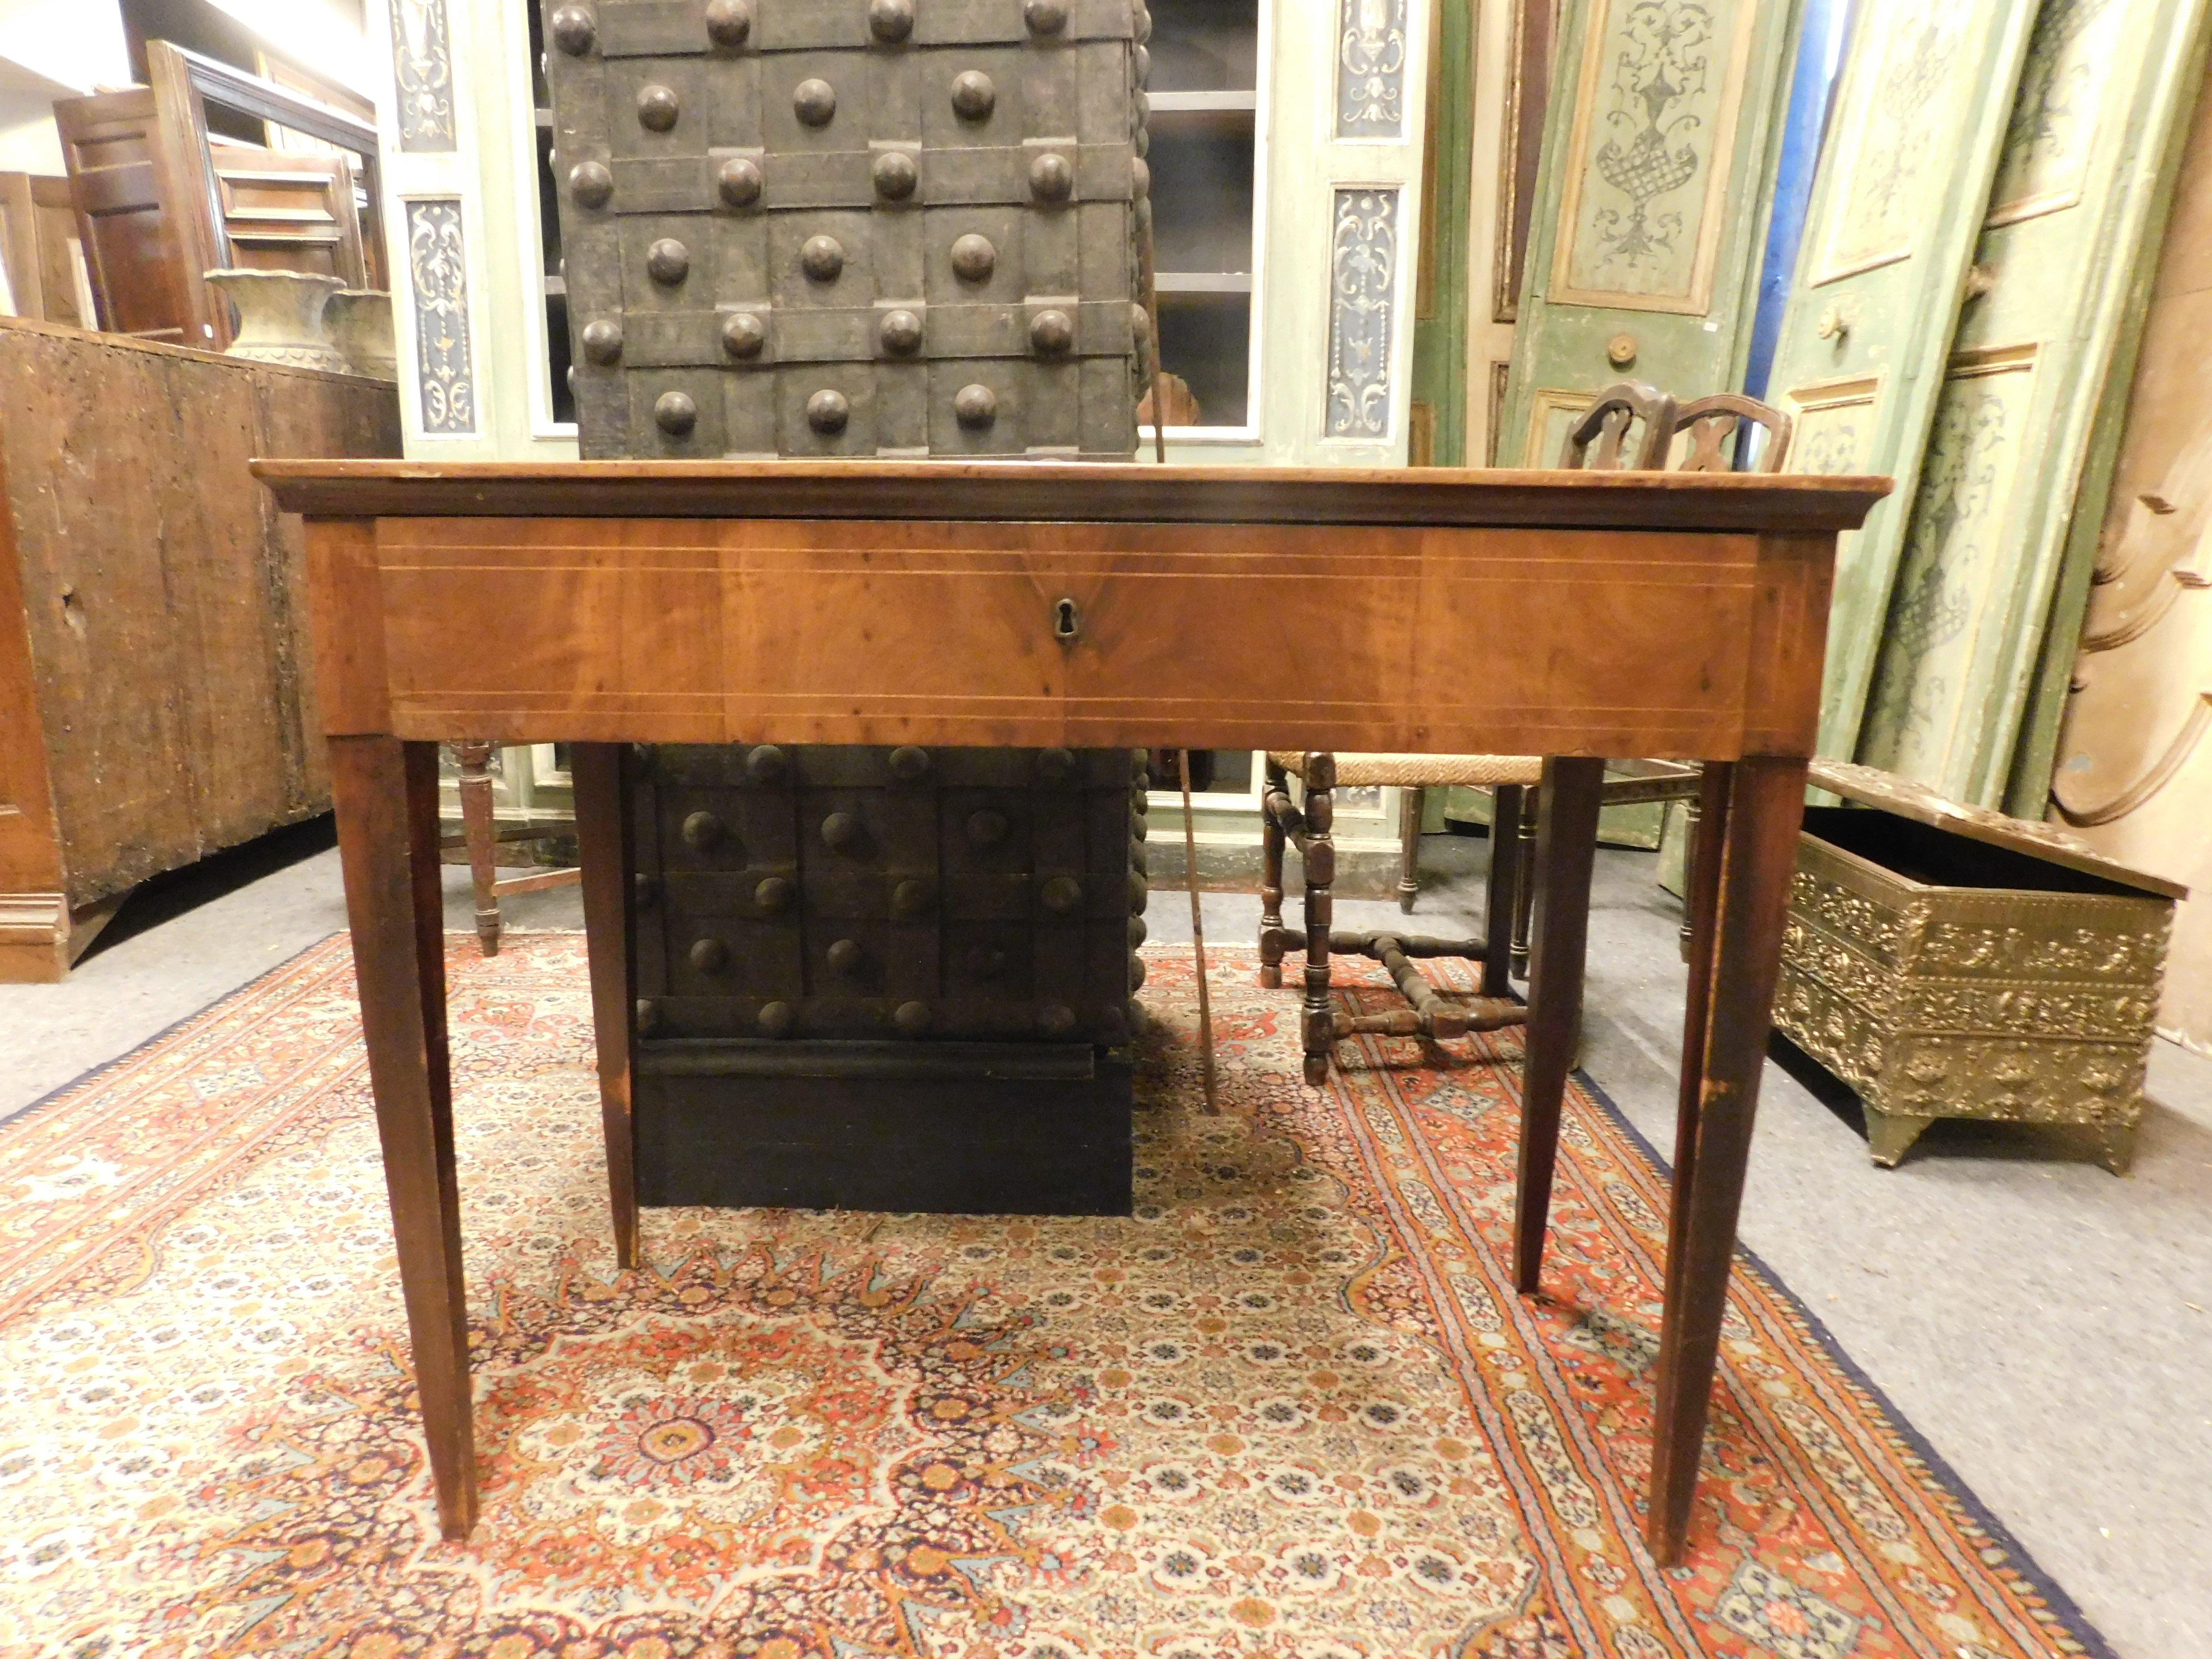 Ancient Genoese writing table in walnut, inlaid with lighter fillet on the upper plank, stiletto legs, hand-built in the 18th century by a craftsman in Italy.
Ideal for studios, offices or private homes, it can fit into any space or room given its